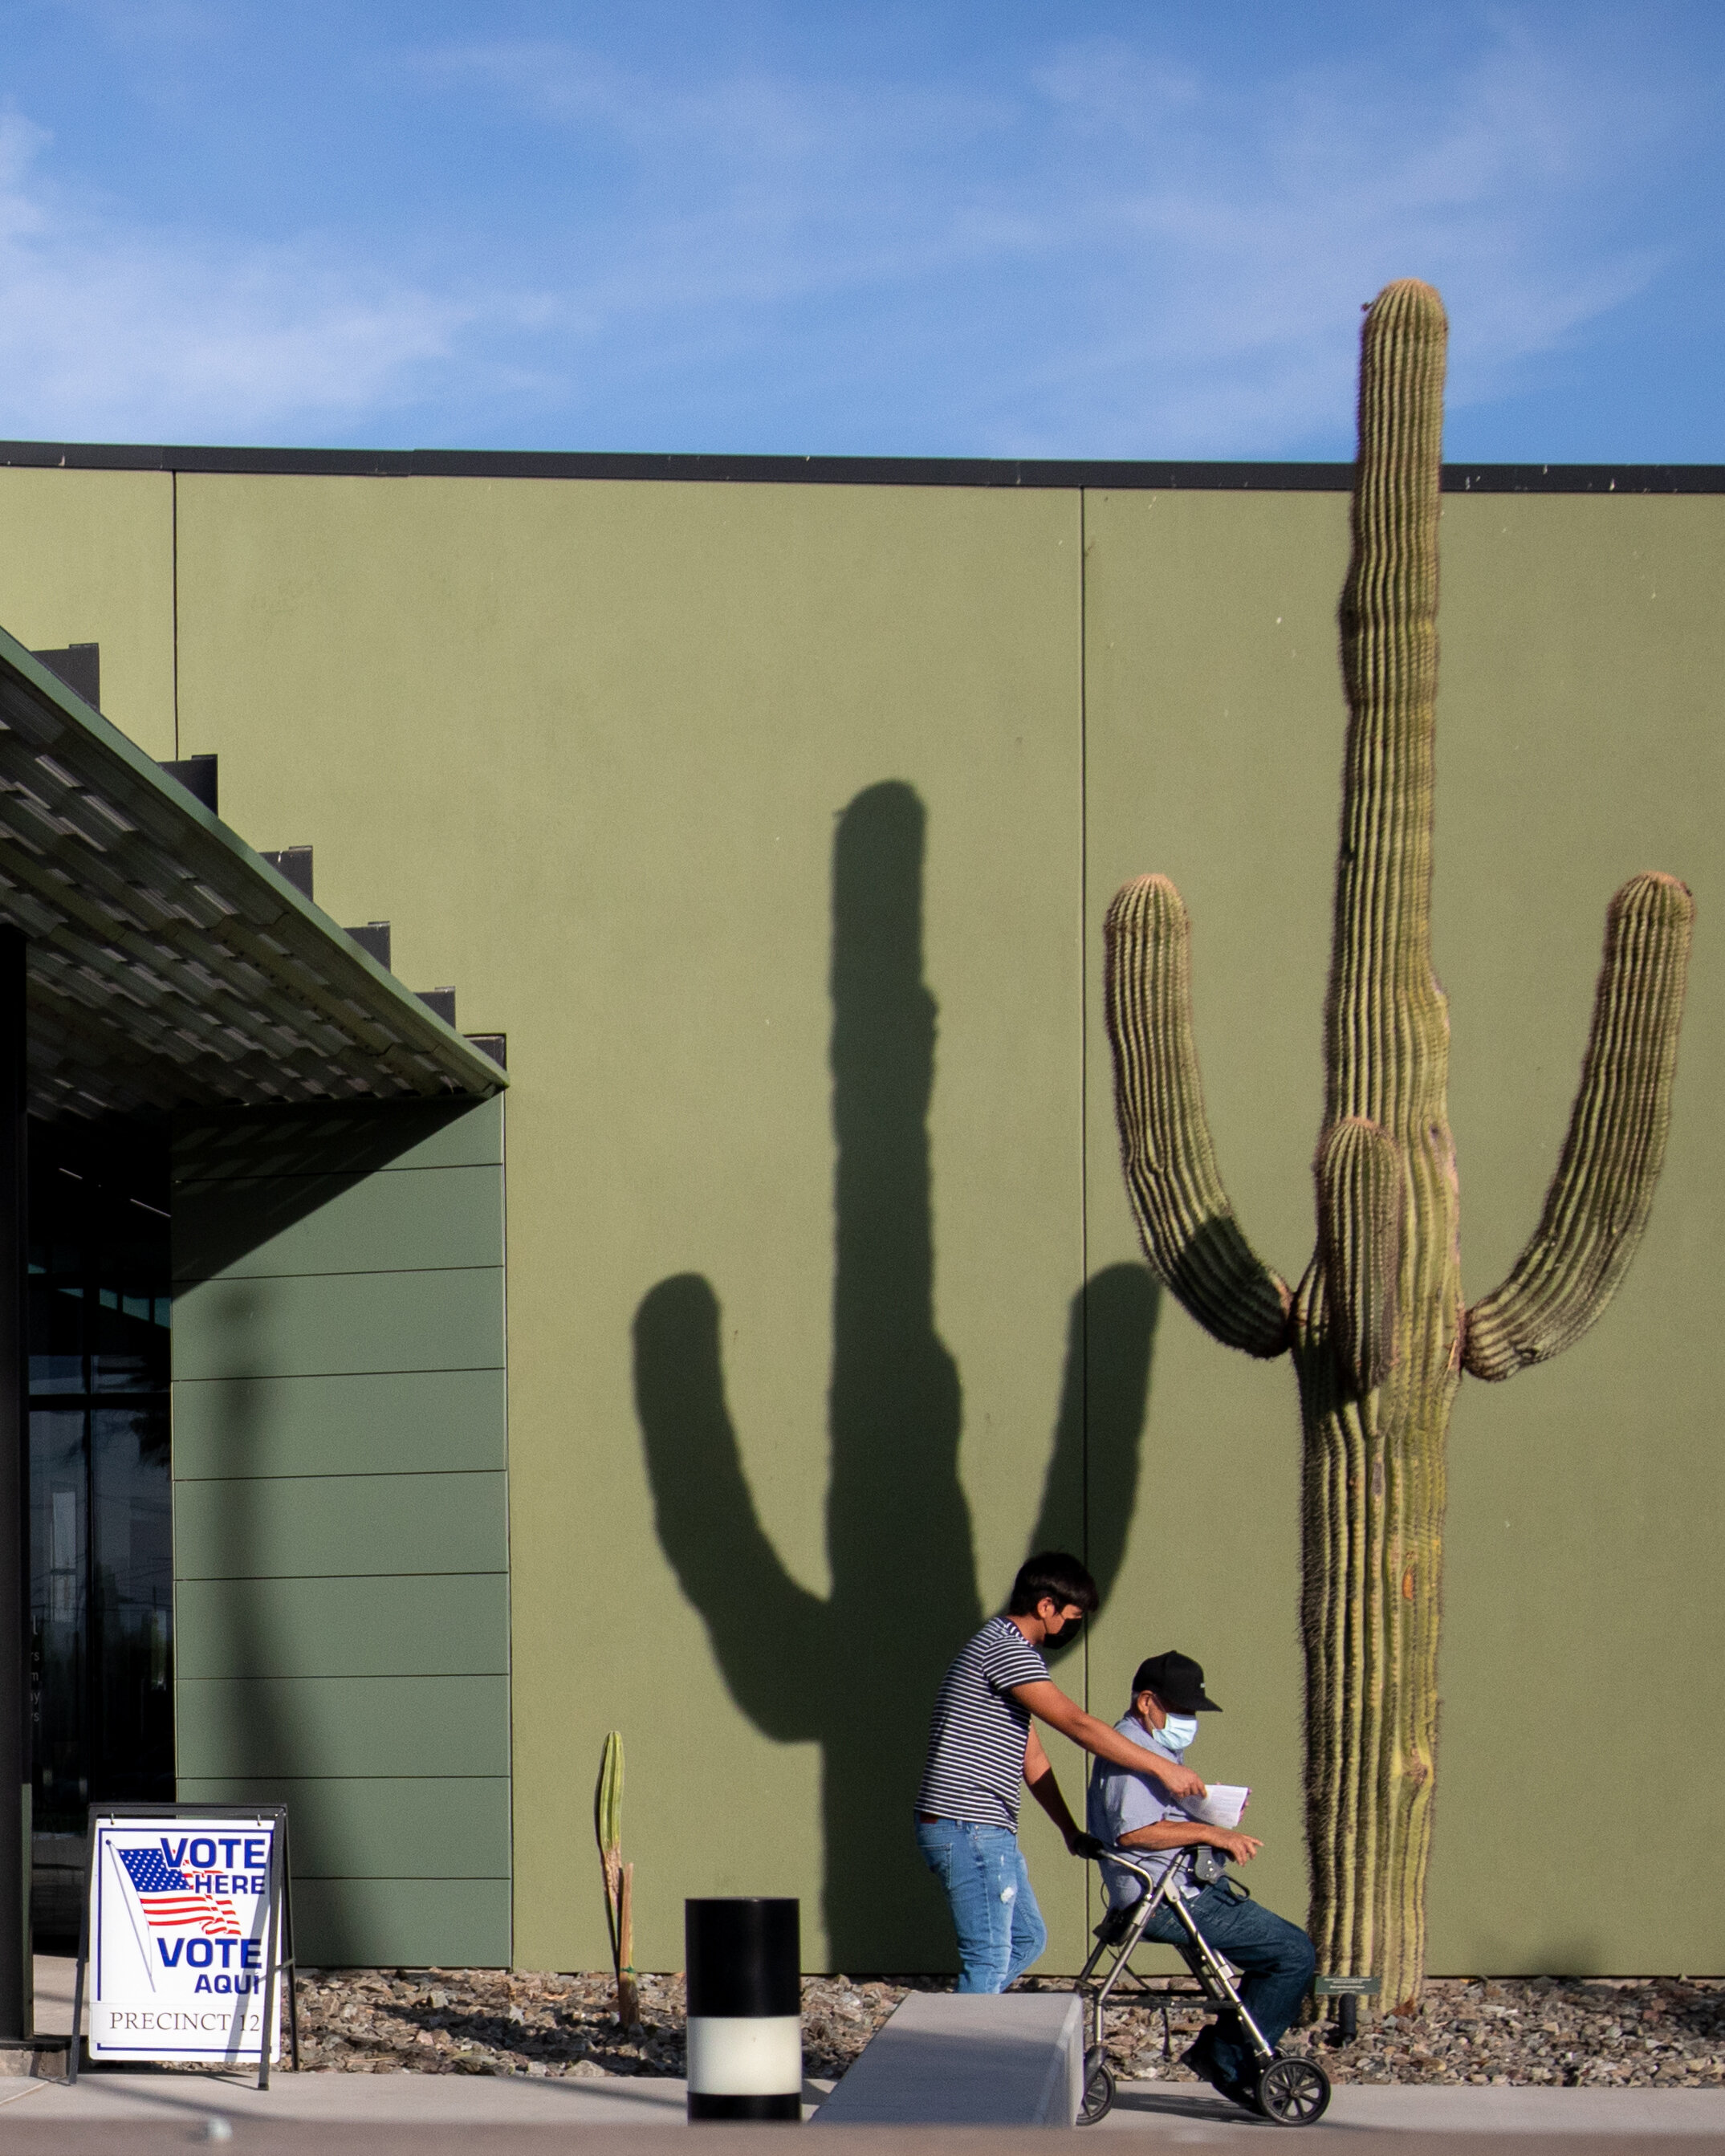  People exit the Eloy City Hall polling location on November 3, 2020 in Eloy, Arizona. After a record-breaking early voting turnout, Americans head to the polls on the last day to cast their vote for incumbent U.S. President Donald Trump or Democrati